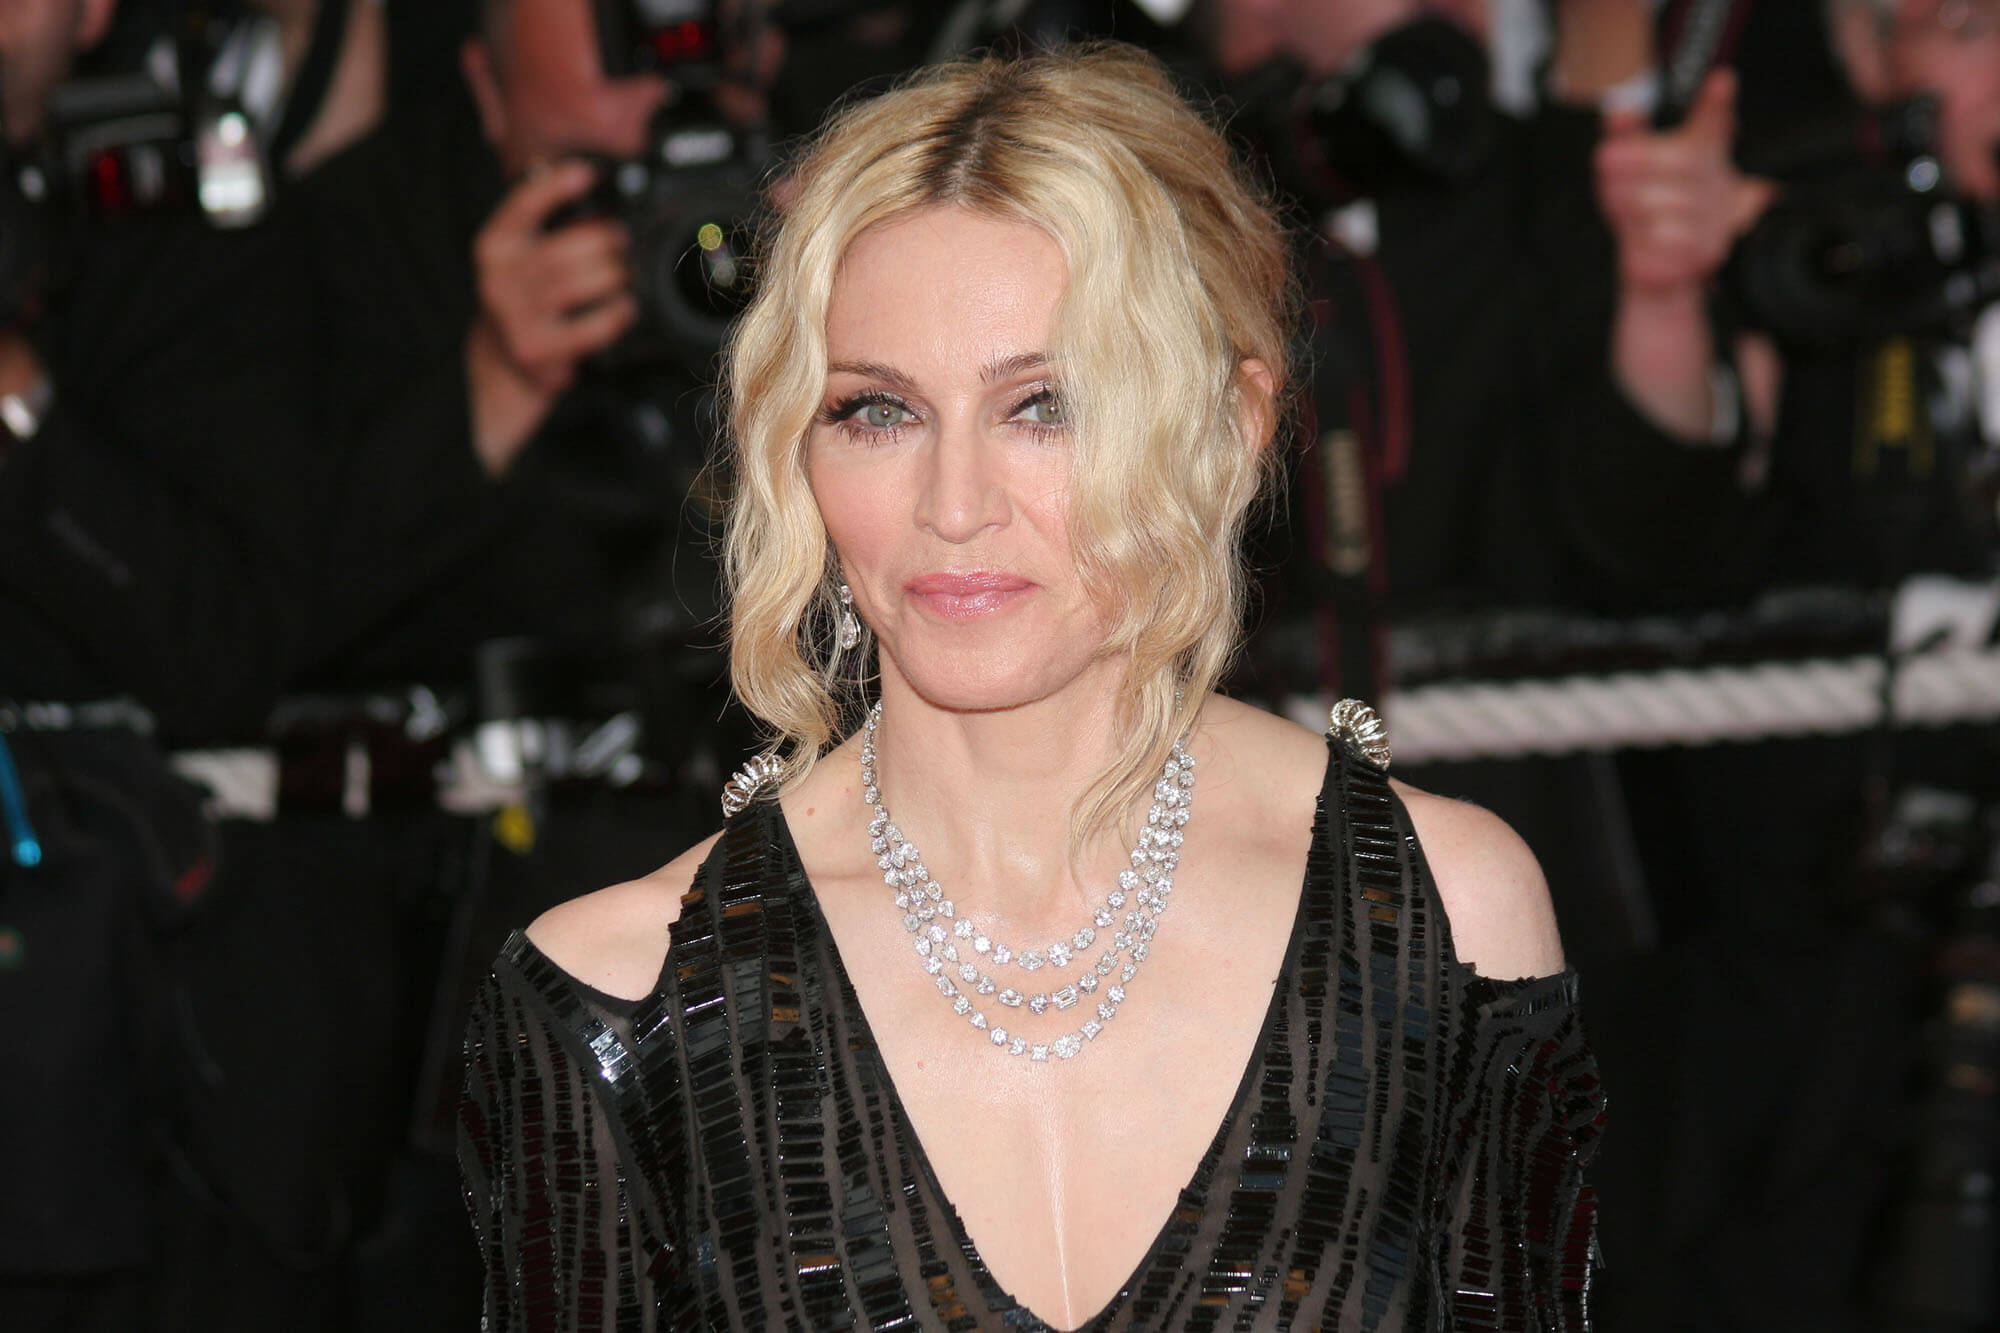 CANNES, FRANCE - MAY 21: Singer Madonna attends the 'I Am Because We Are' premiere at the Palais des Festivals during the 61st International Cannes Film Festival on May 21, 2008 in Cannes, France.